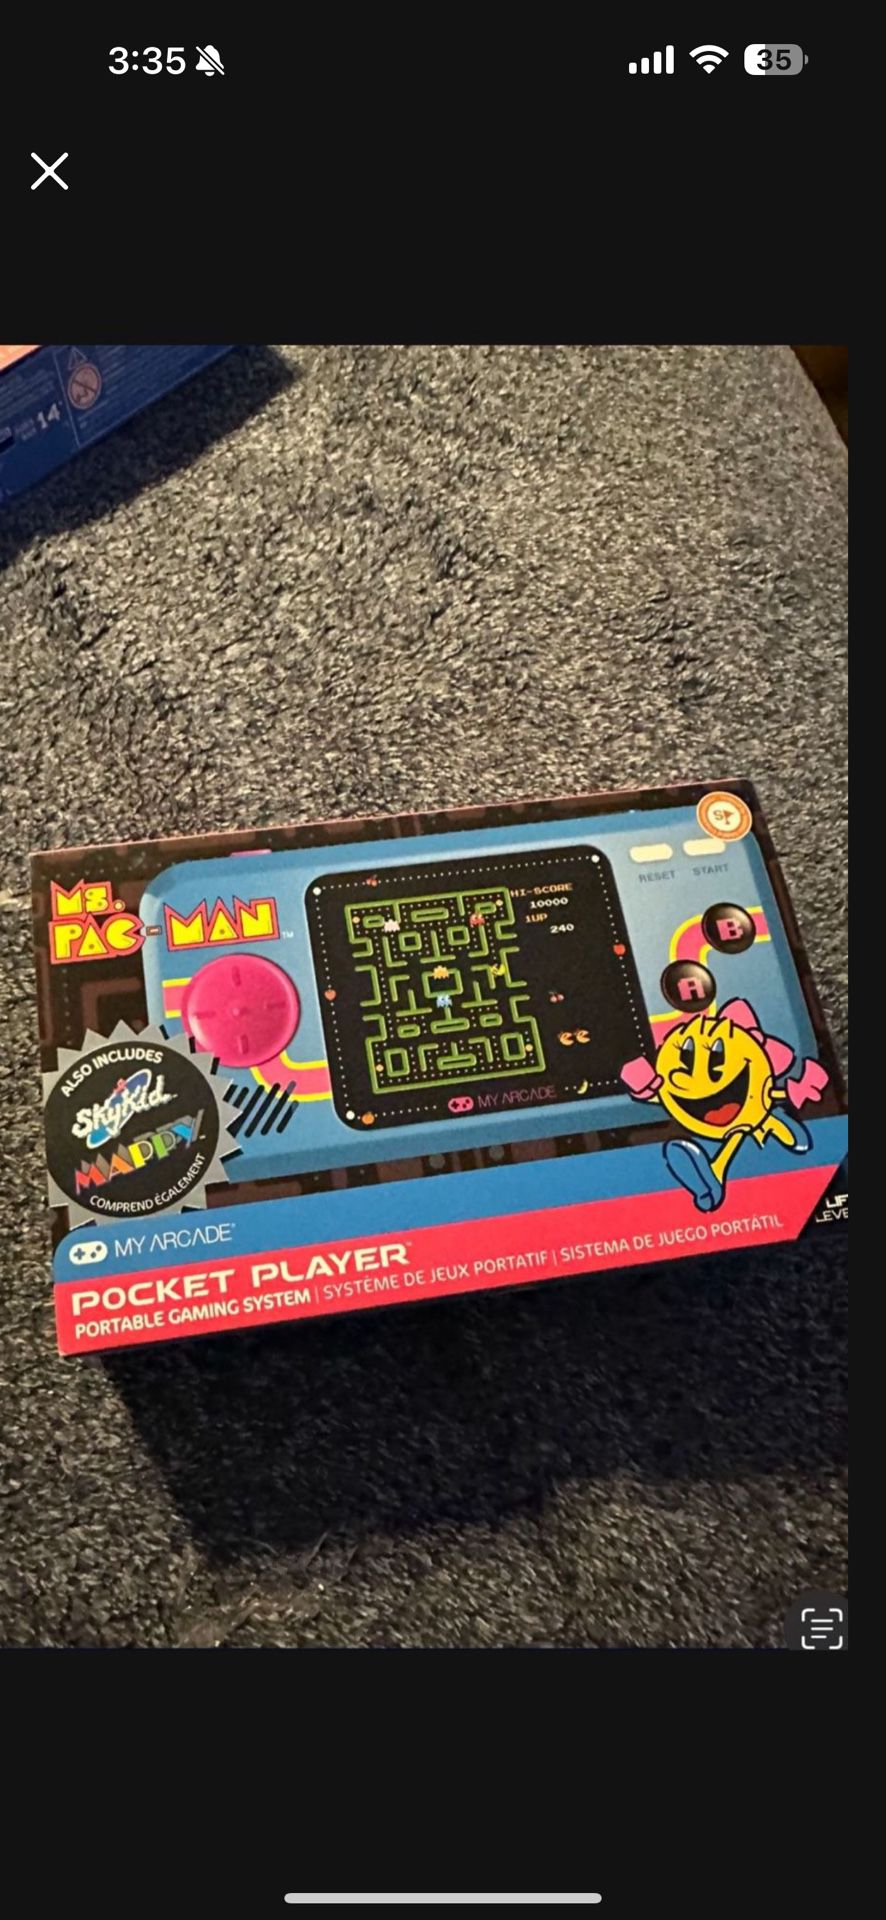 My Arcade Ms. Pac-Man Pocket Player Handheld Game Console